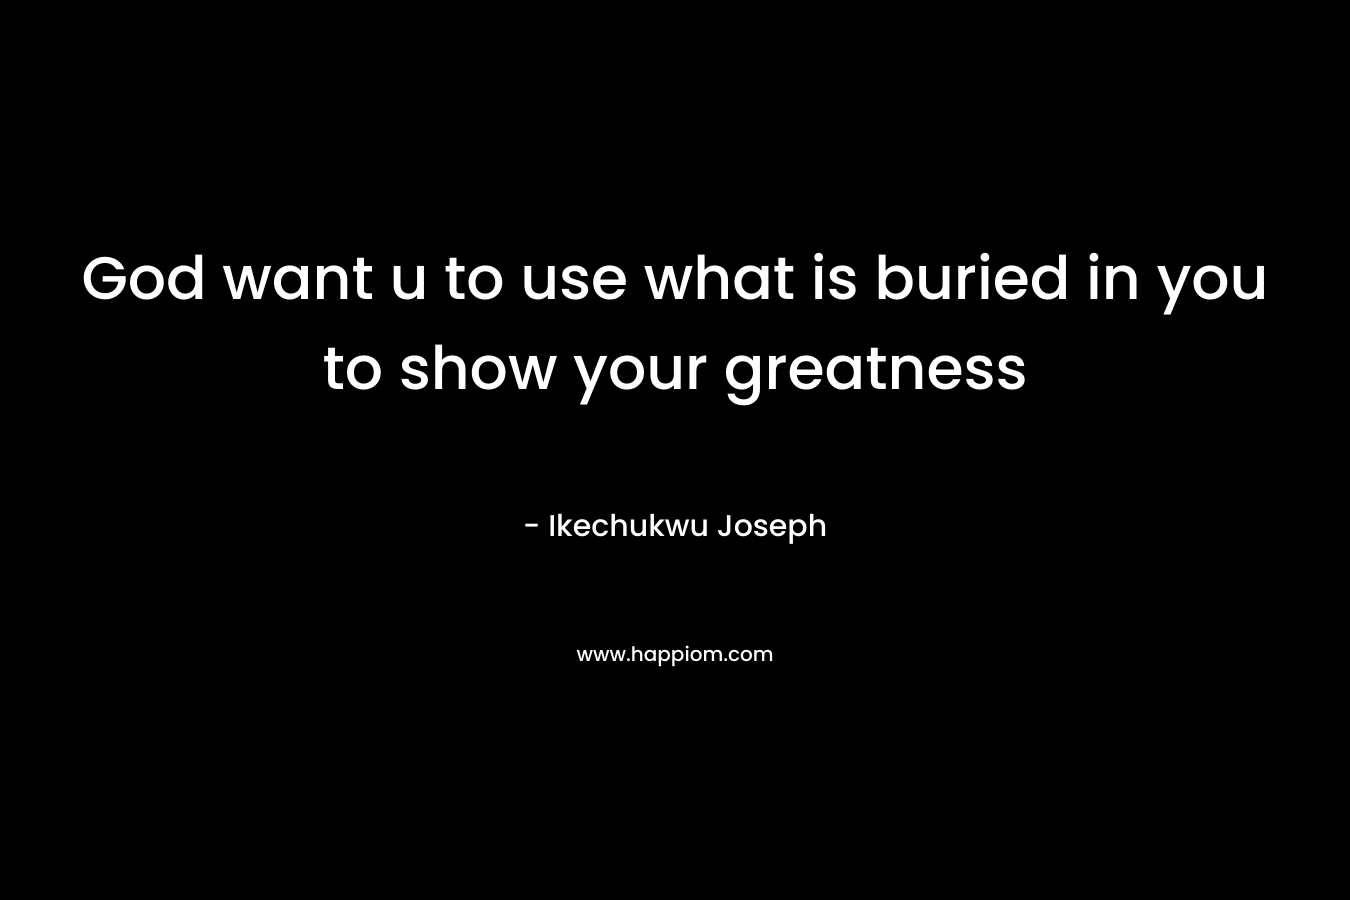 God want u to use what is buried in you to show your greatness – Ikechukwu Joseph